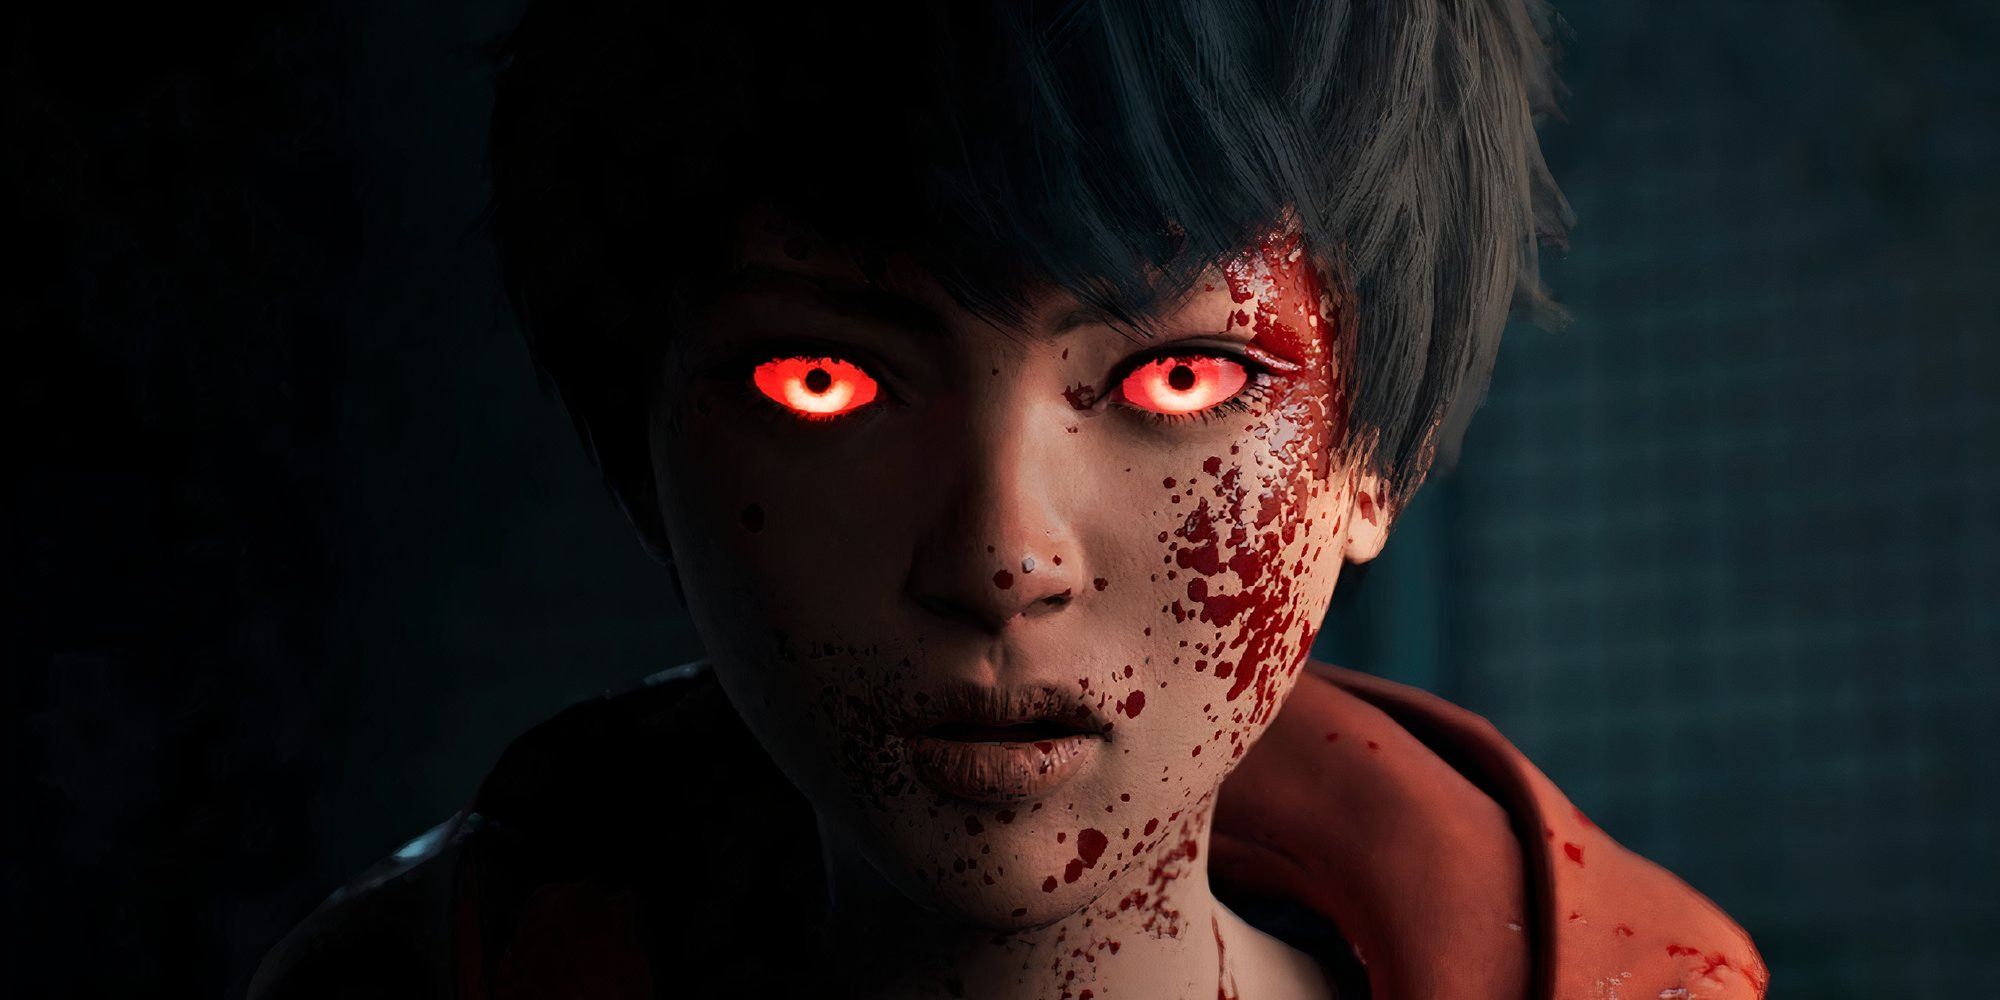 Still from Slitterhead of a boy with glowing red eyes and blood splattered on his face.